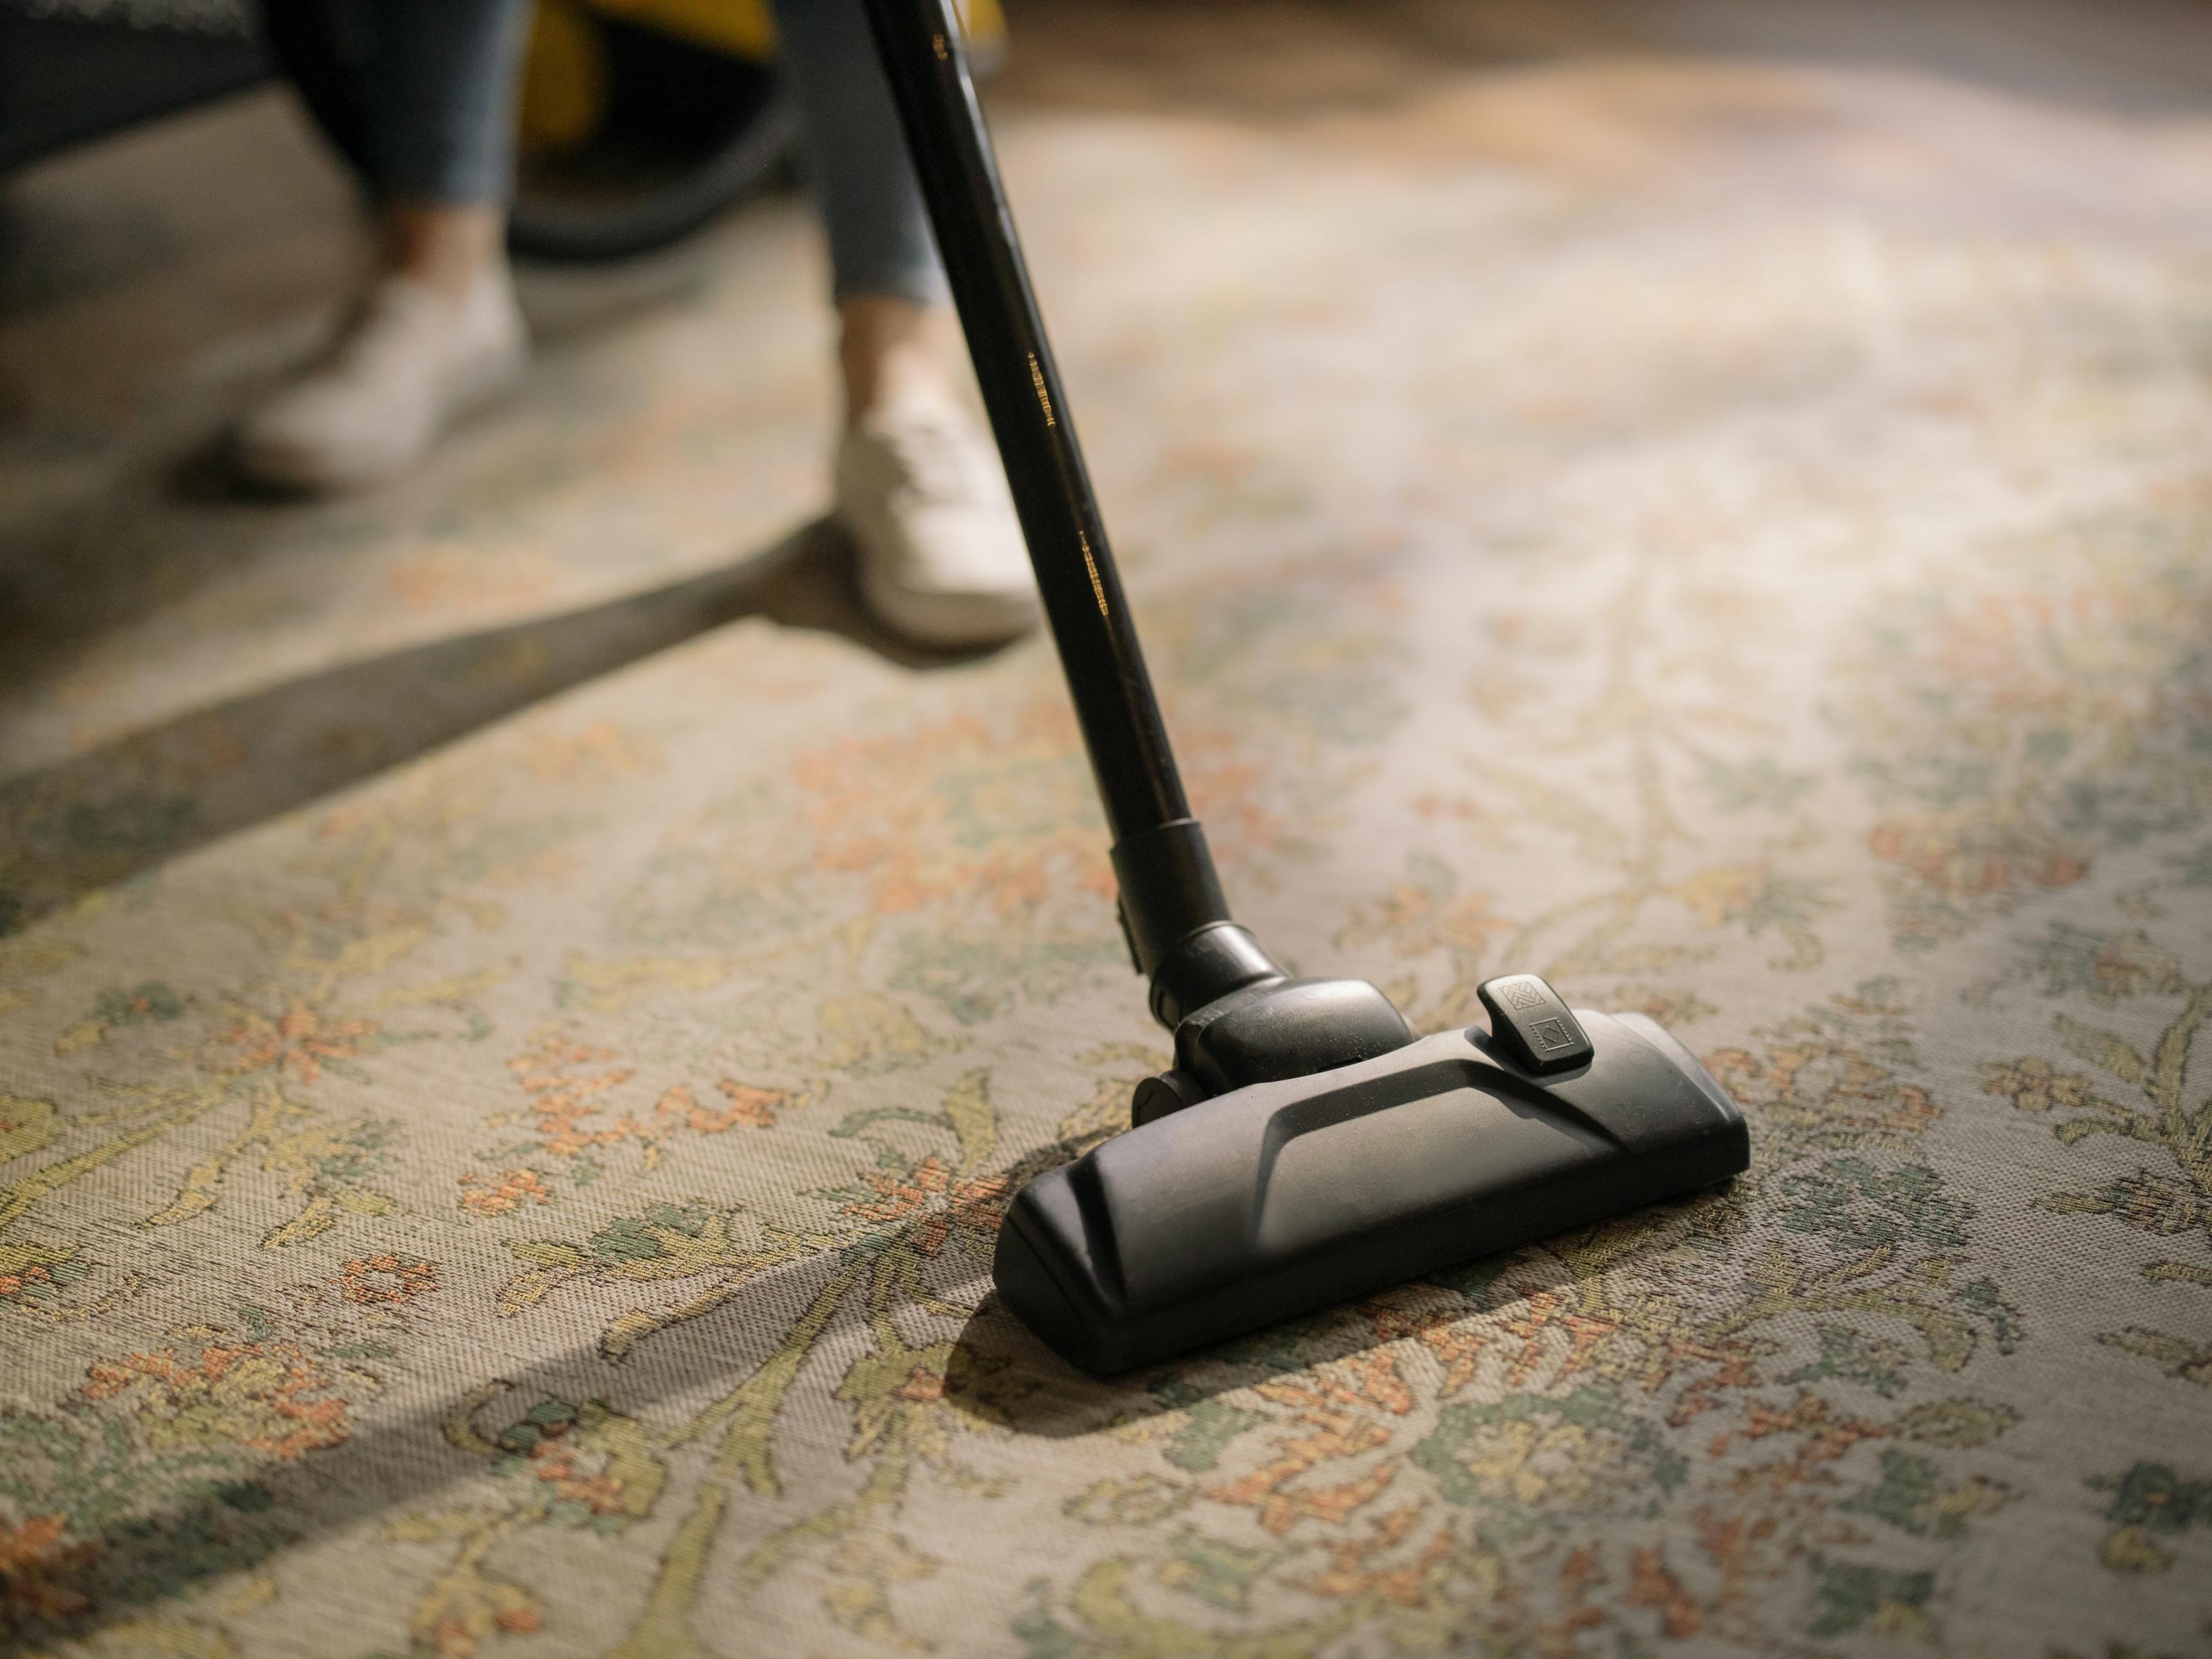 Premium Steam Carpet Cleaning Services in Cherry Hill